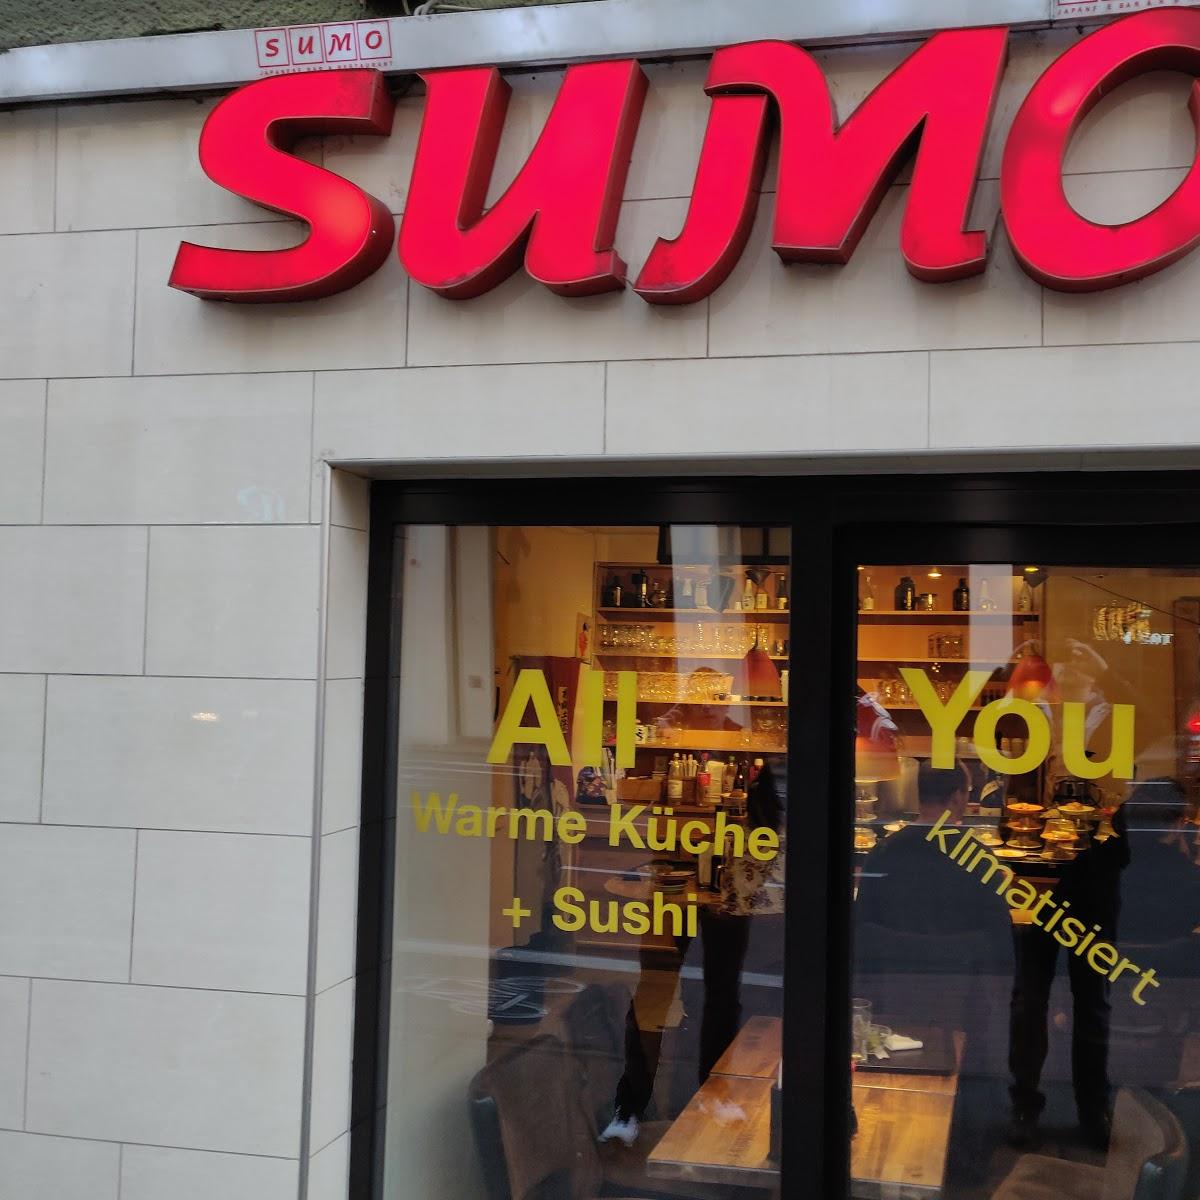 Restaurant "Sumo Sushi All you can eat" in Köln